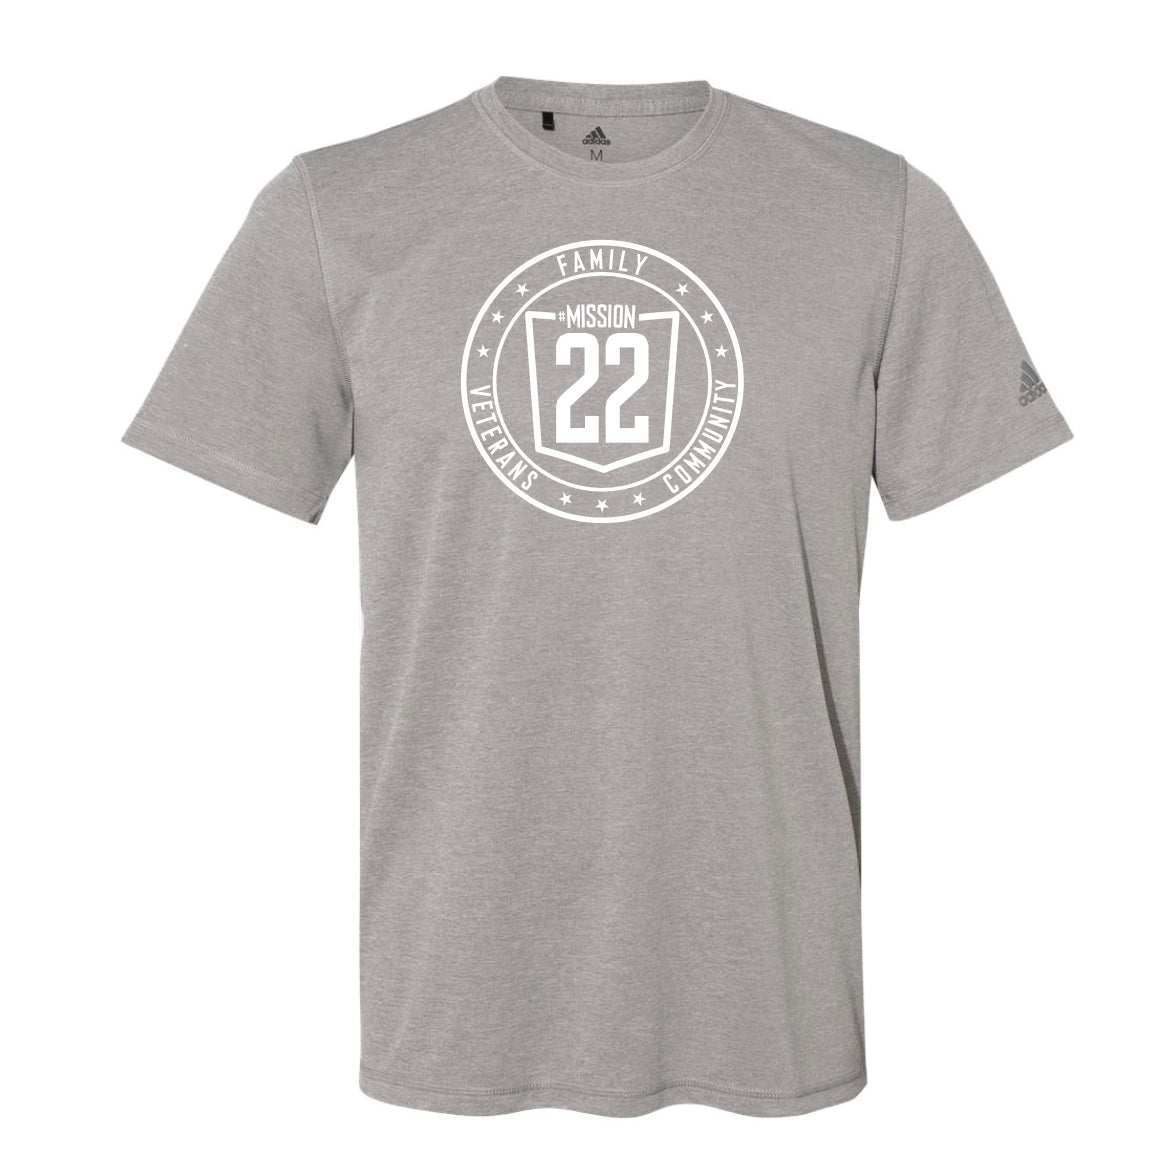 Product Image of Mission 22 Performance Tee #1